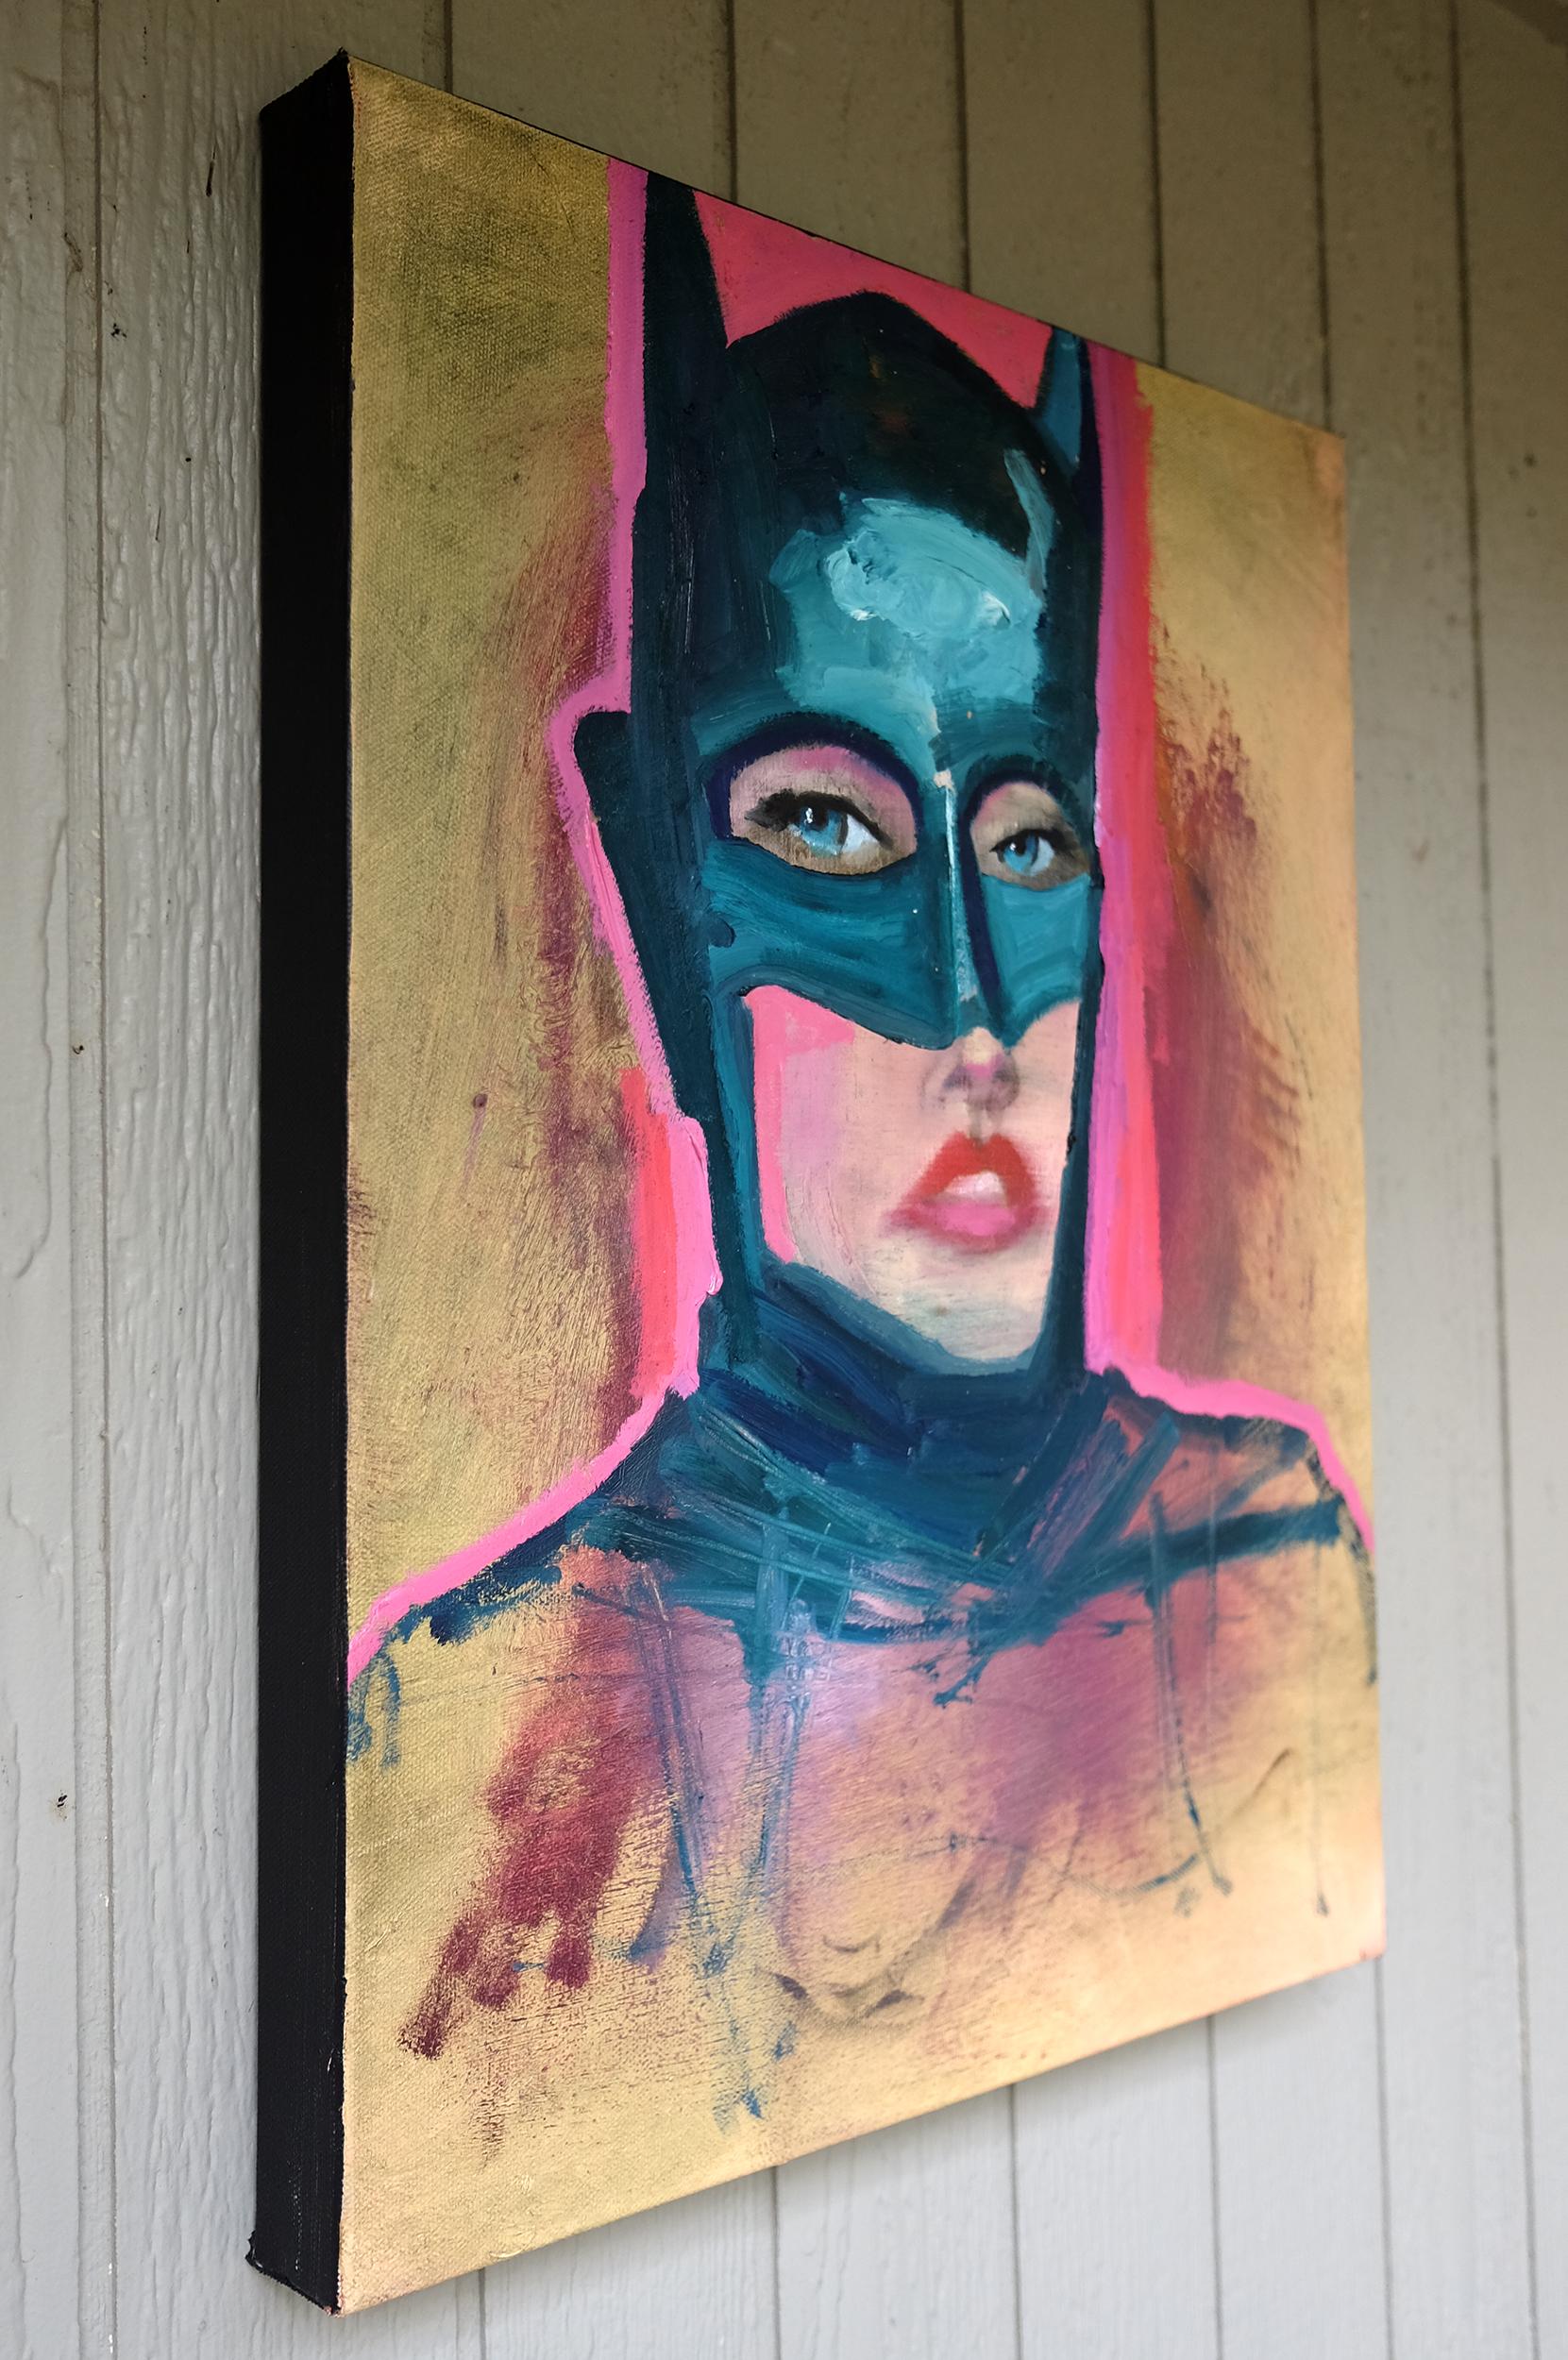 <p>Artist Comments<br>Displaying his own rendition of popular iconography, artist Scott Dykema shares a charming image of Batgirl. Part of his series of portraits of famous comic book heroes. He reinterprets the masked city protector in his distinct